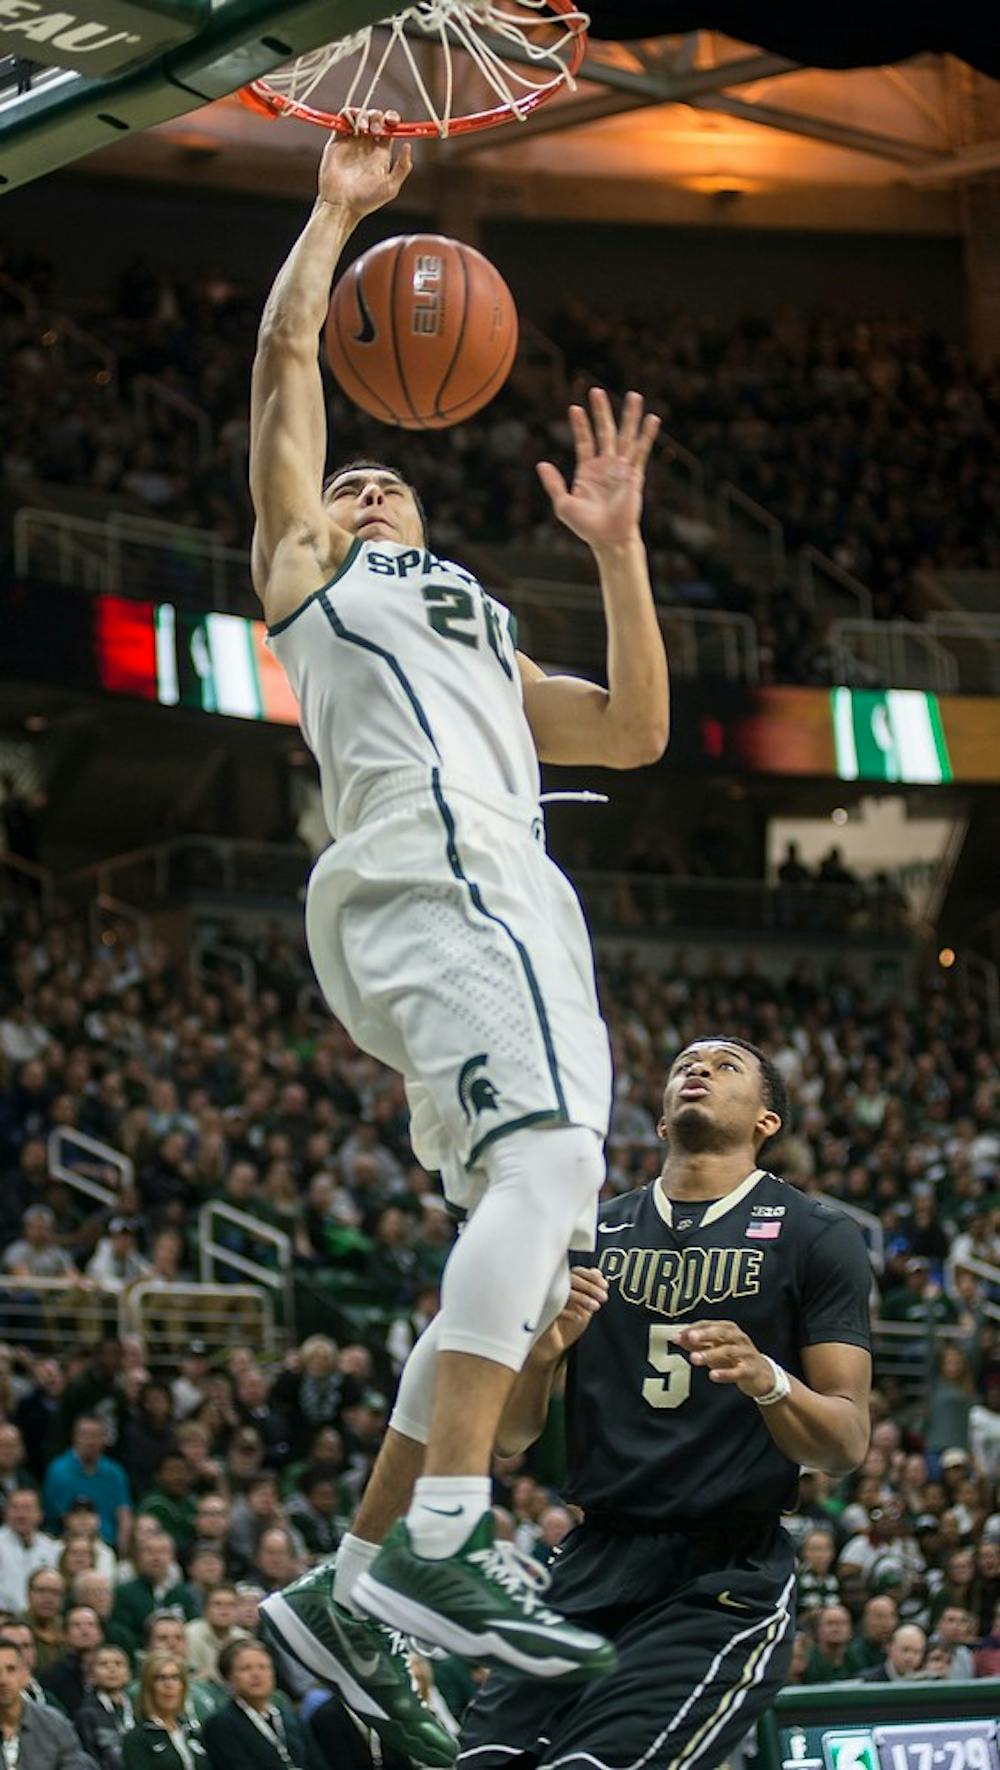 <p>Senior guard Travis Trice dunks the ball Mar. 4, 2015, during the game against Purdue at Breslin Center. At halftime, the Boilermakers were leading against the Spartans, 30-27. Emily Nagle/The State News</p>